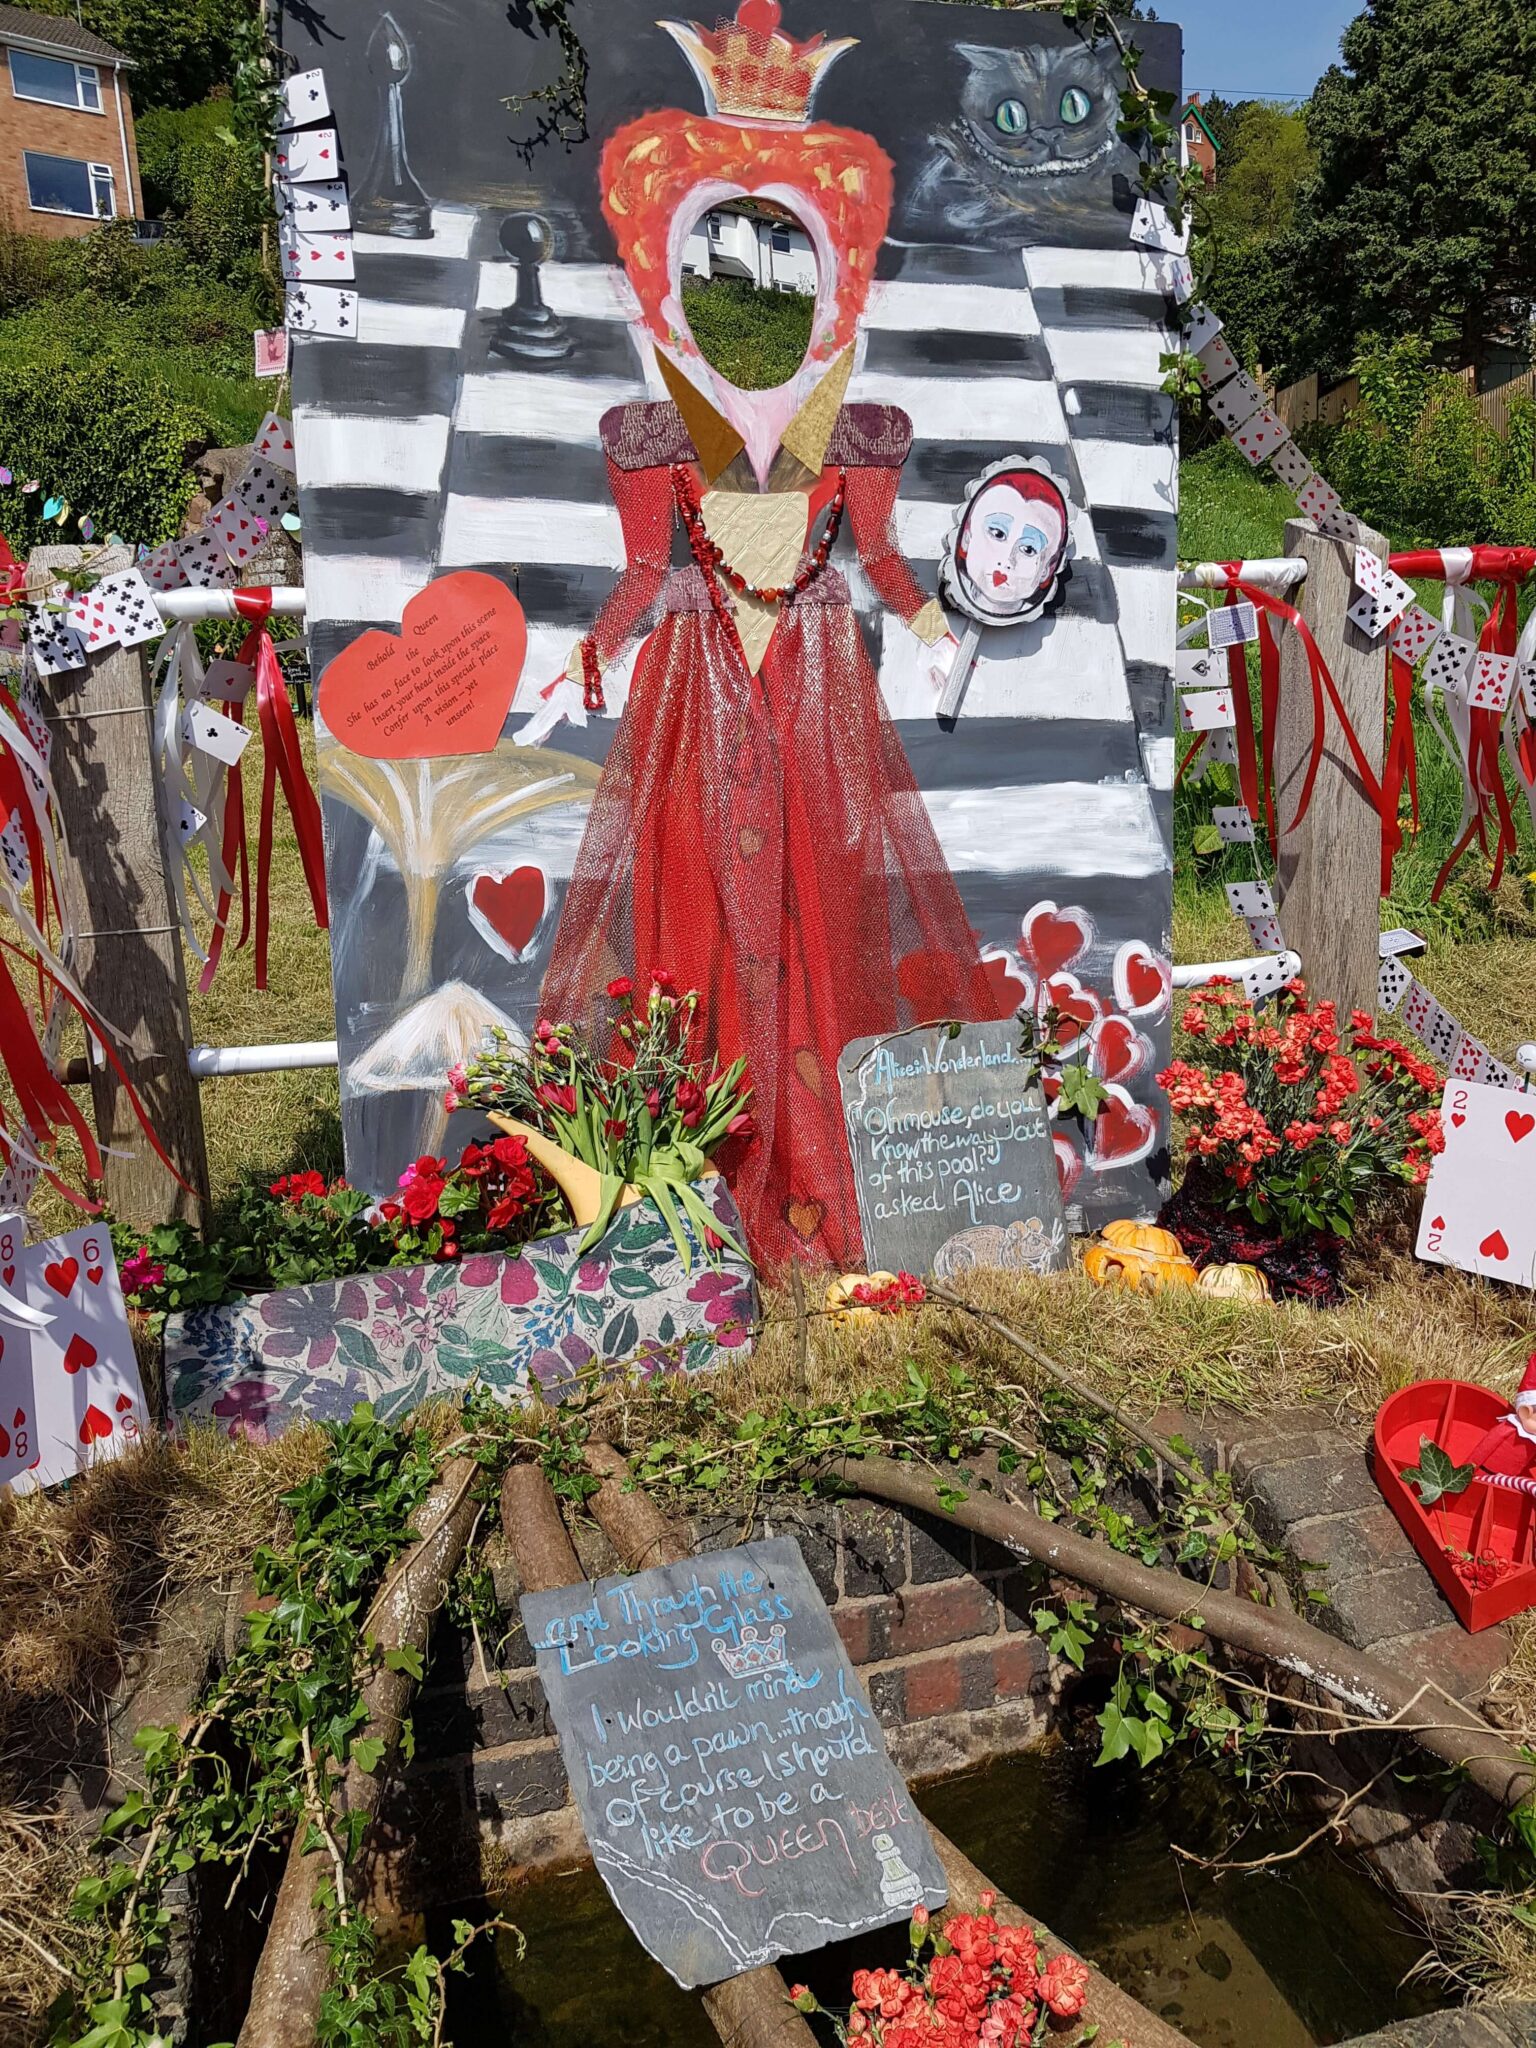 Lower Wyche Trough decorated as the queen of hearts